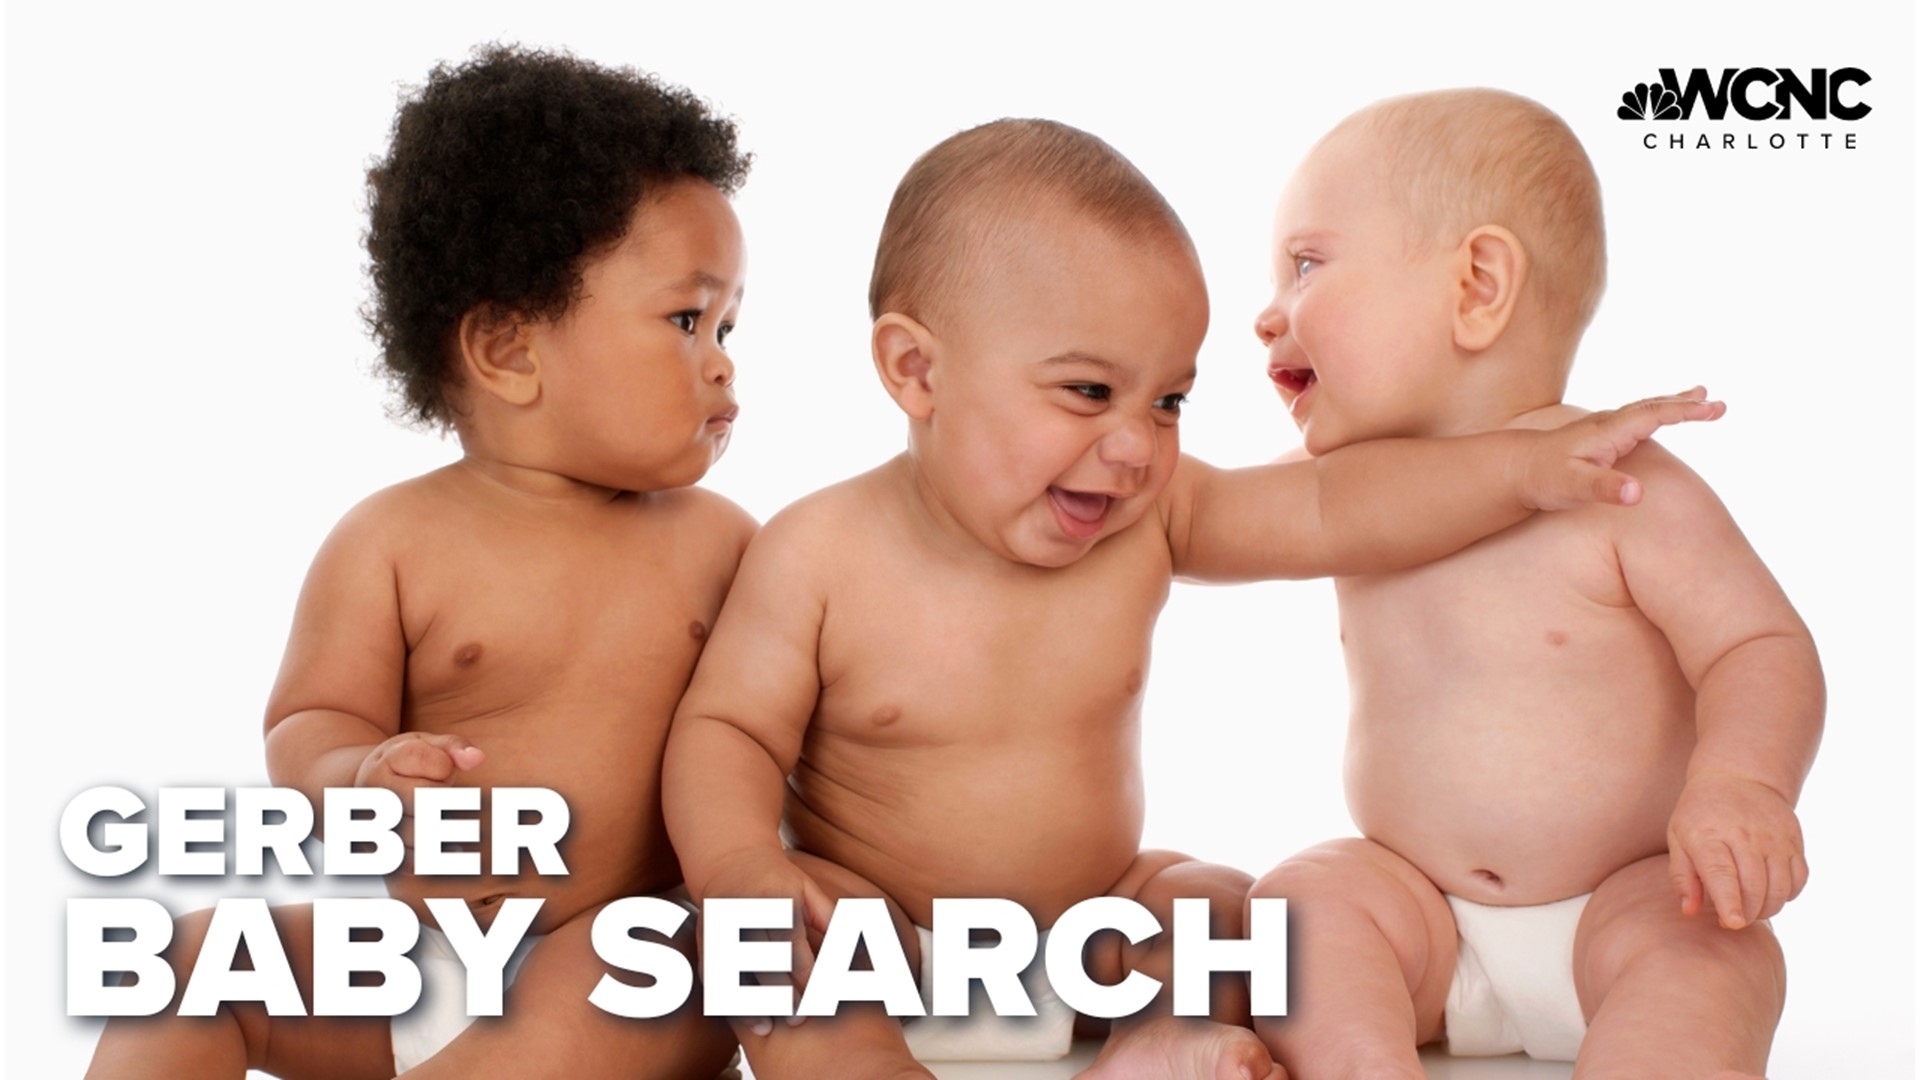 Gerber Announces Winner of Be Our Baby Photo Search 2014!